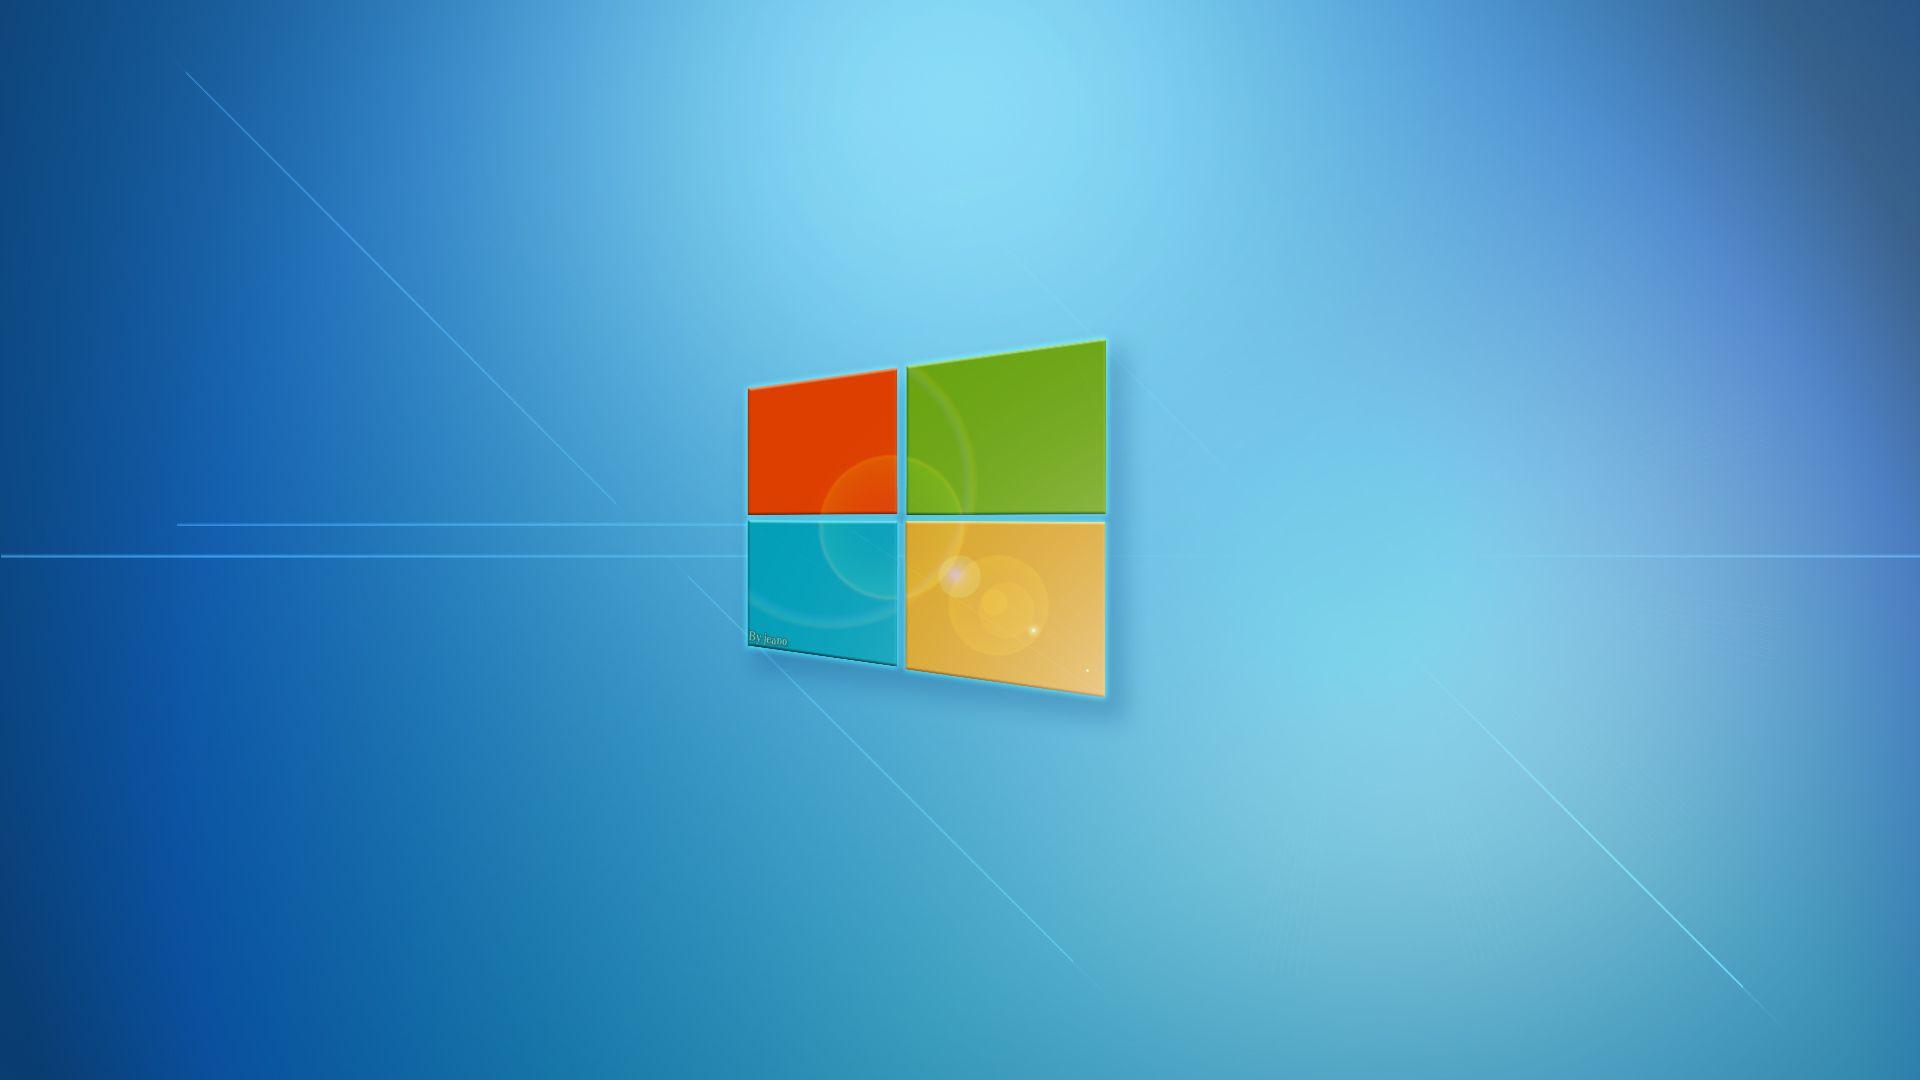 Microsoft Computer Wallpapers Group